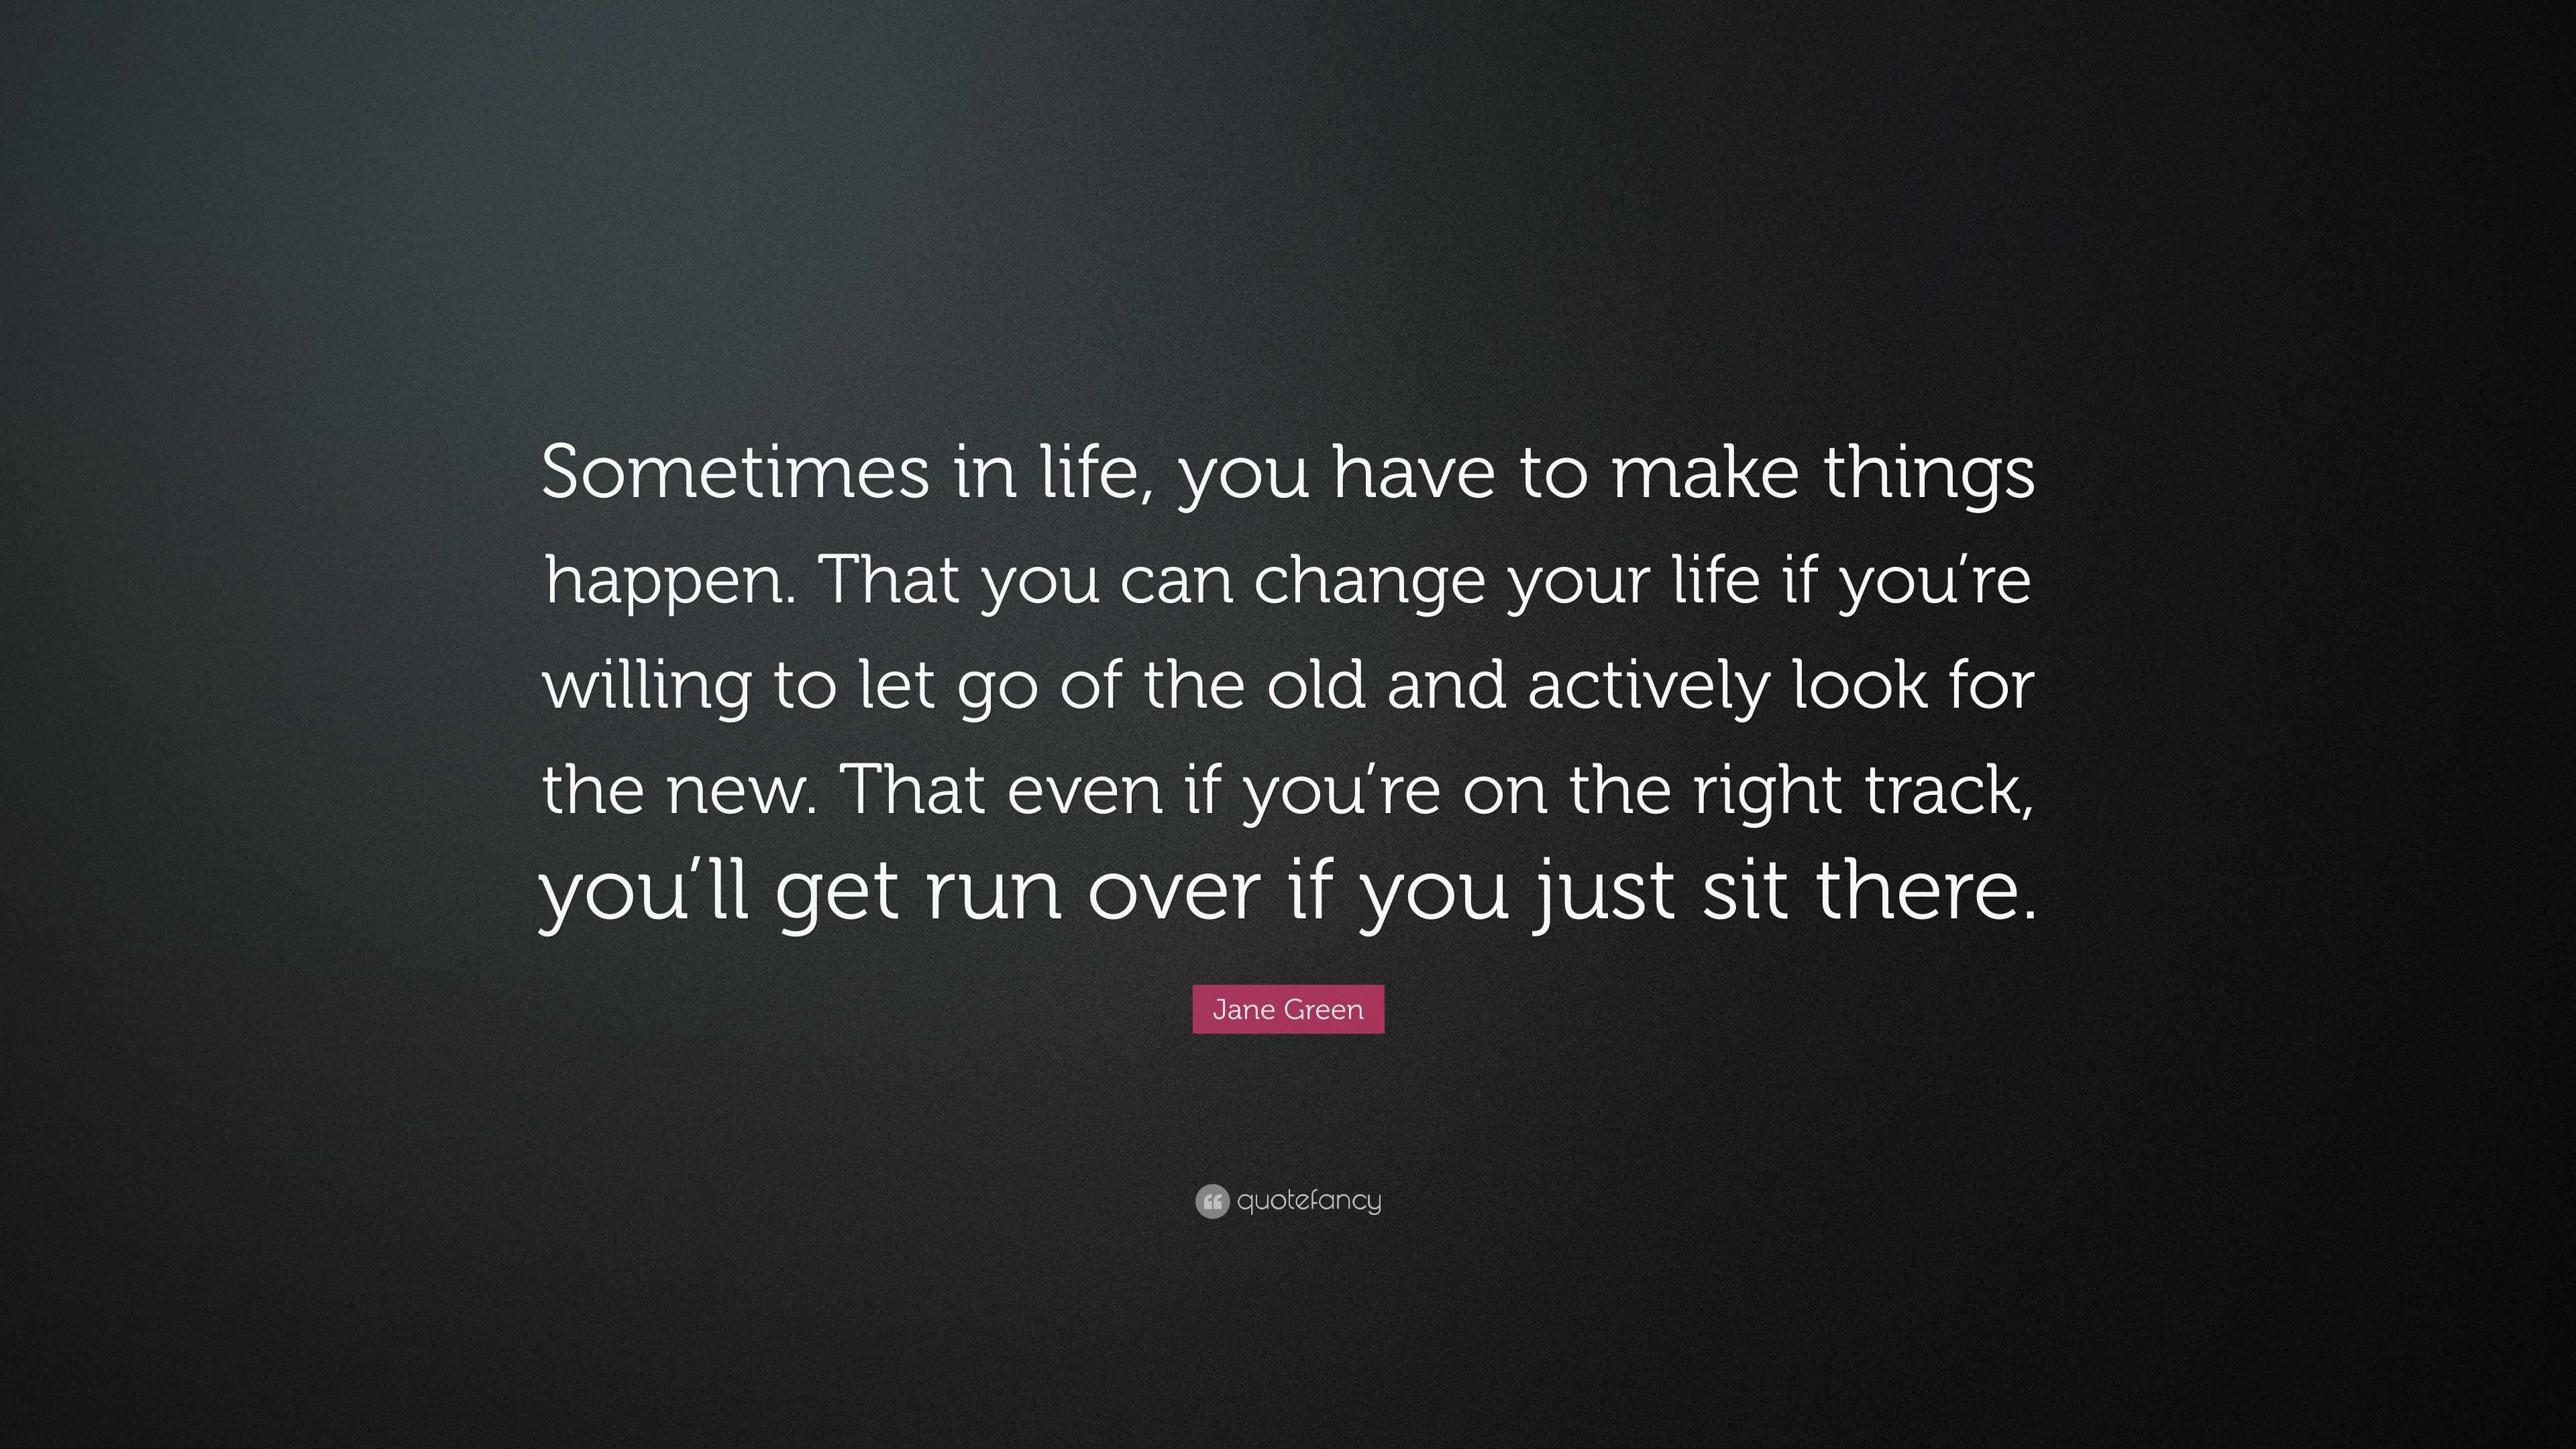 Jane Green Quote: “Sometimes in life, you have to make things happen ...